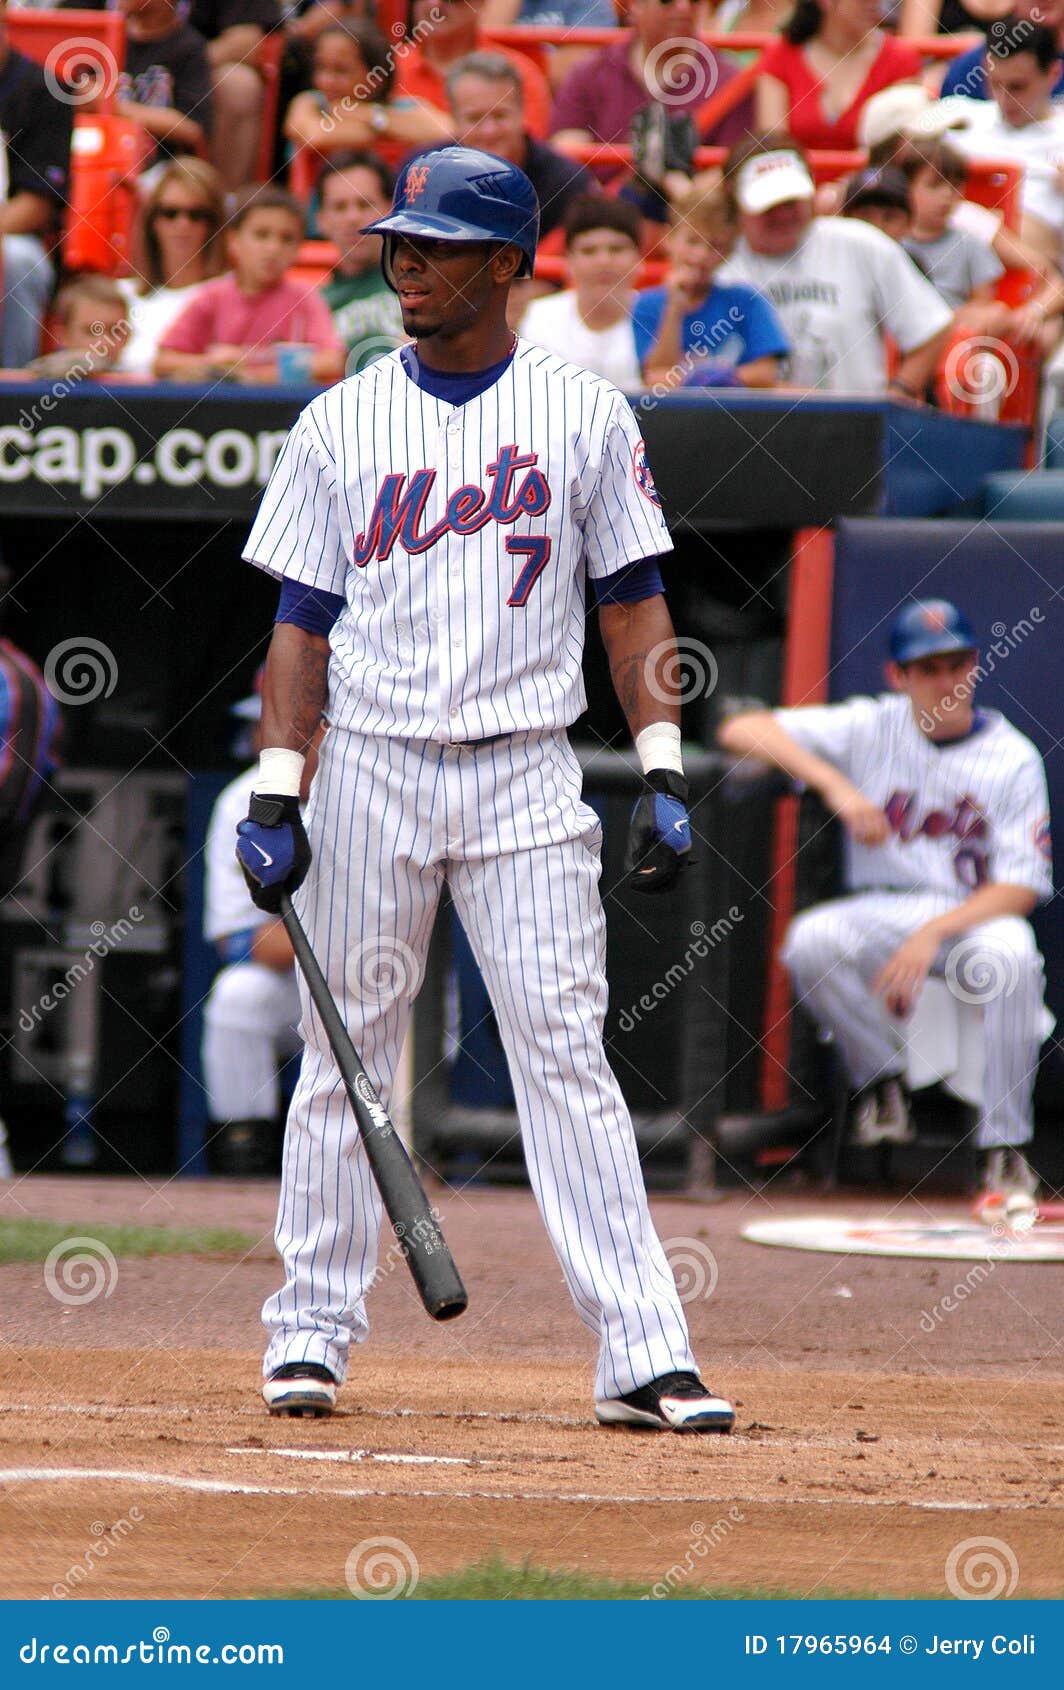 Mets trying to get Jose Reyes going at the plate